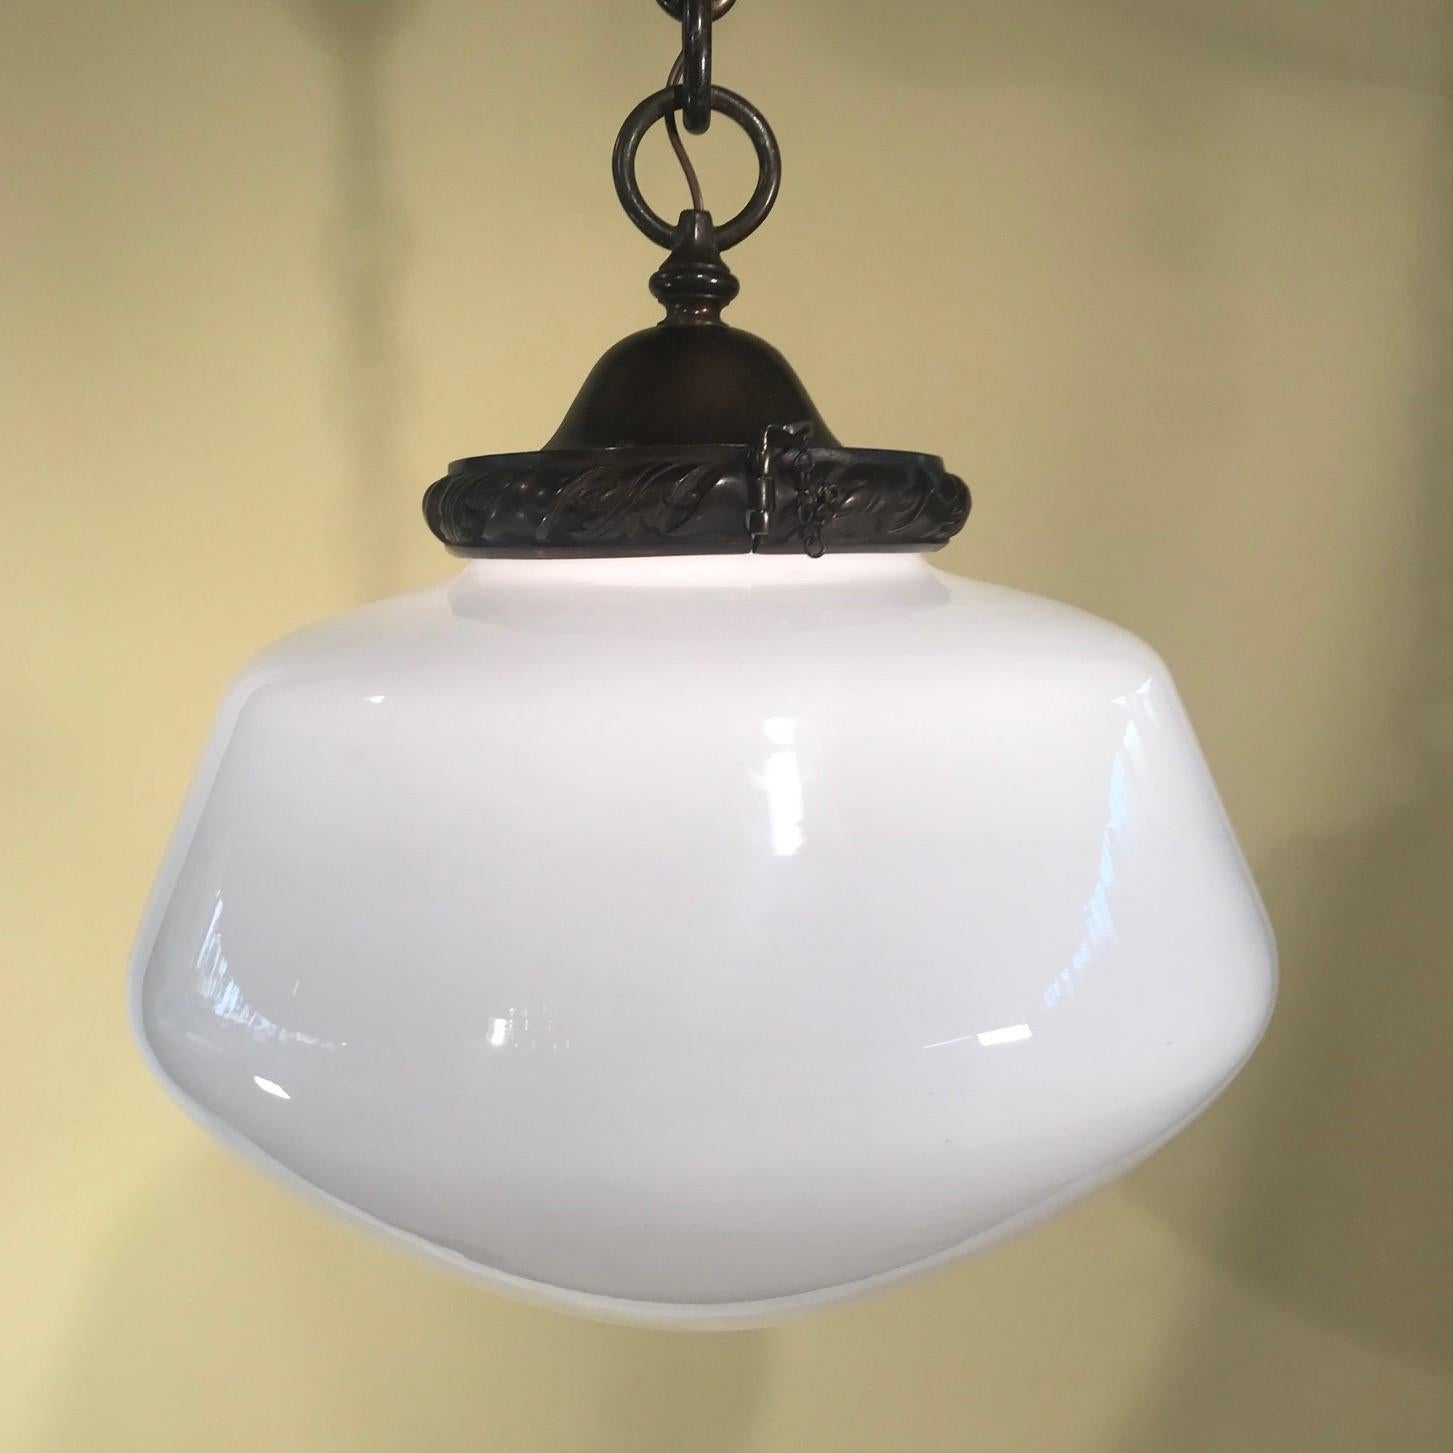 A 1920s bronze pendant light with a large white opal glass globe. The bronze fitter has a dark antique patina and is cast with decorated wreath and ribbon design, supported by a large loop, heavy decorative chain and original bell -shaped ceiling